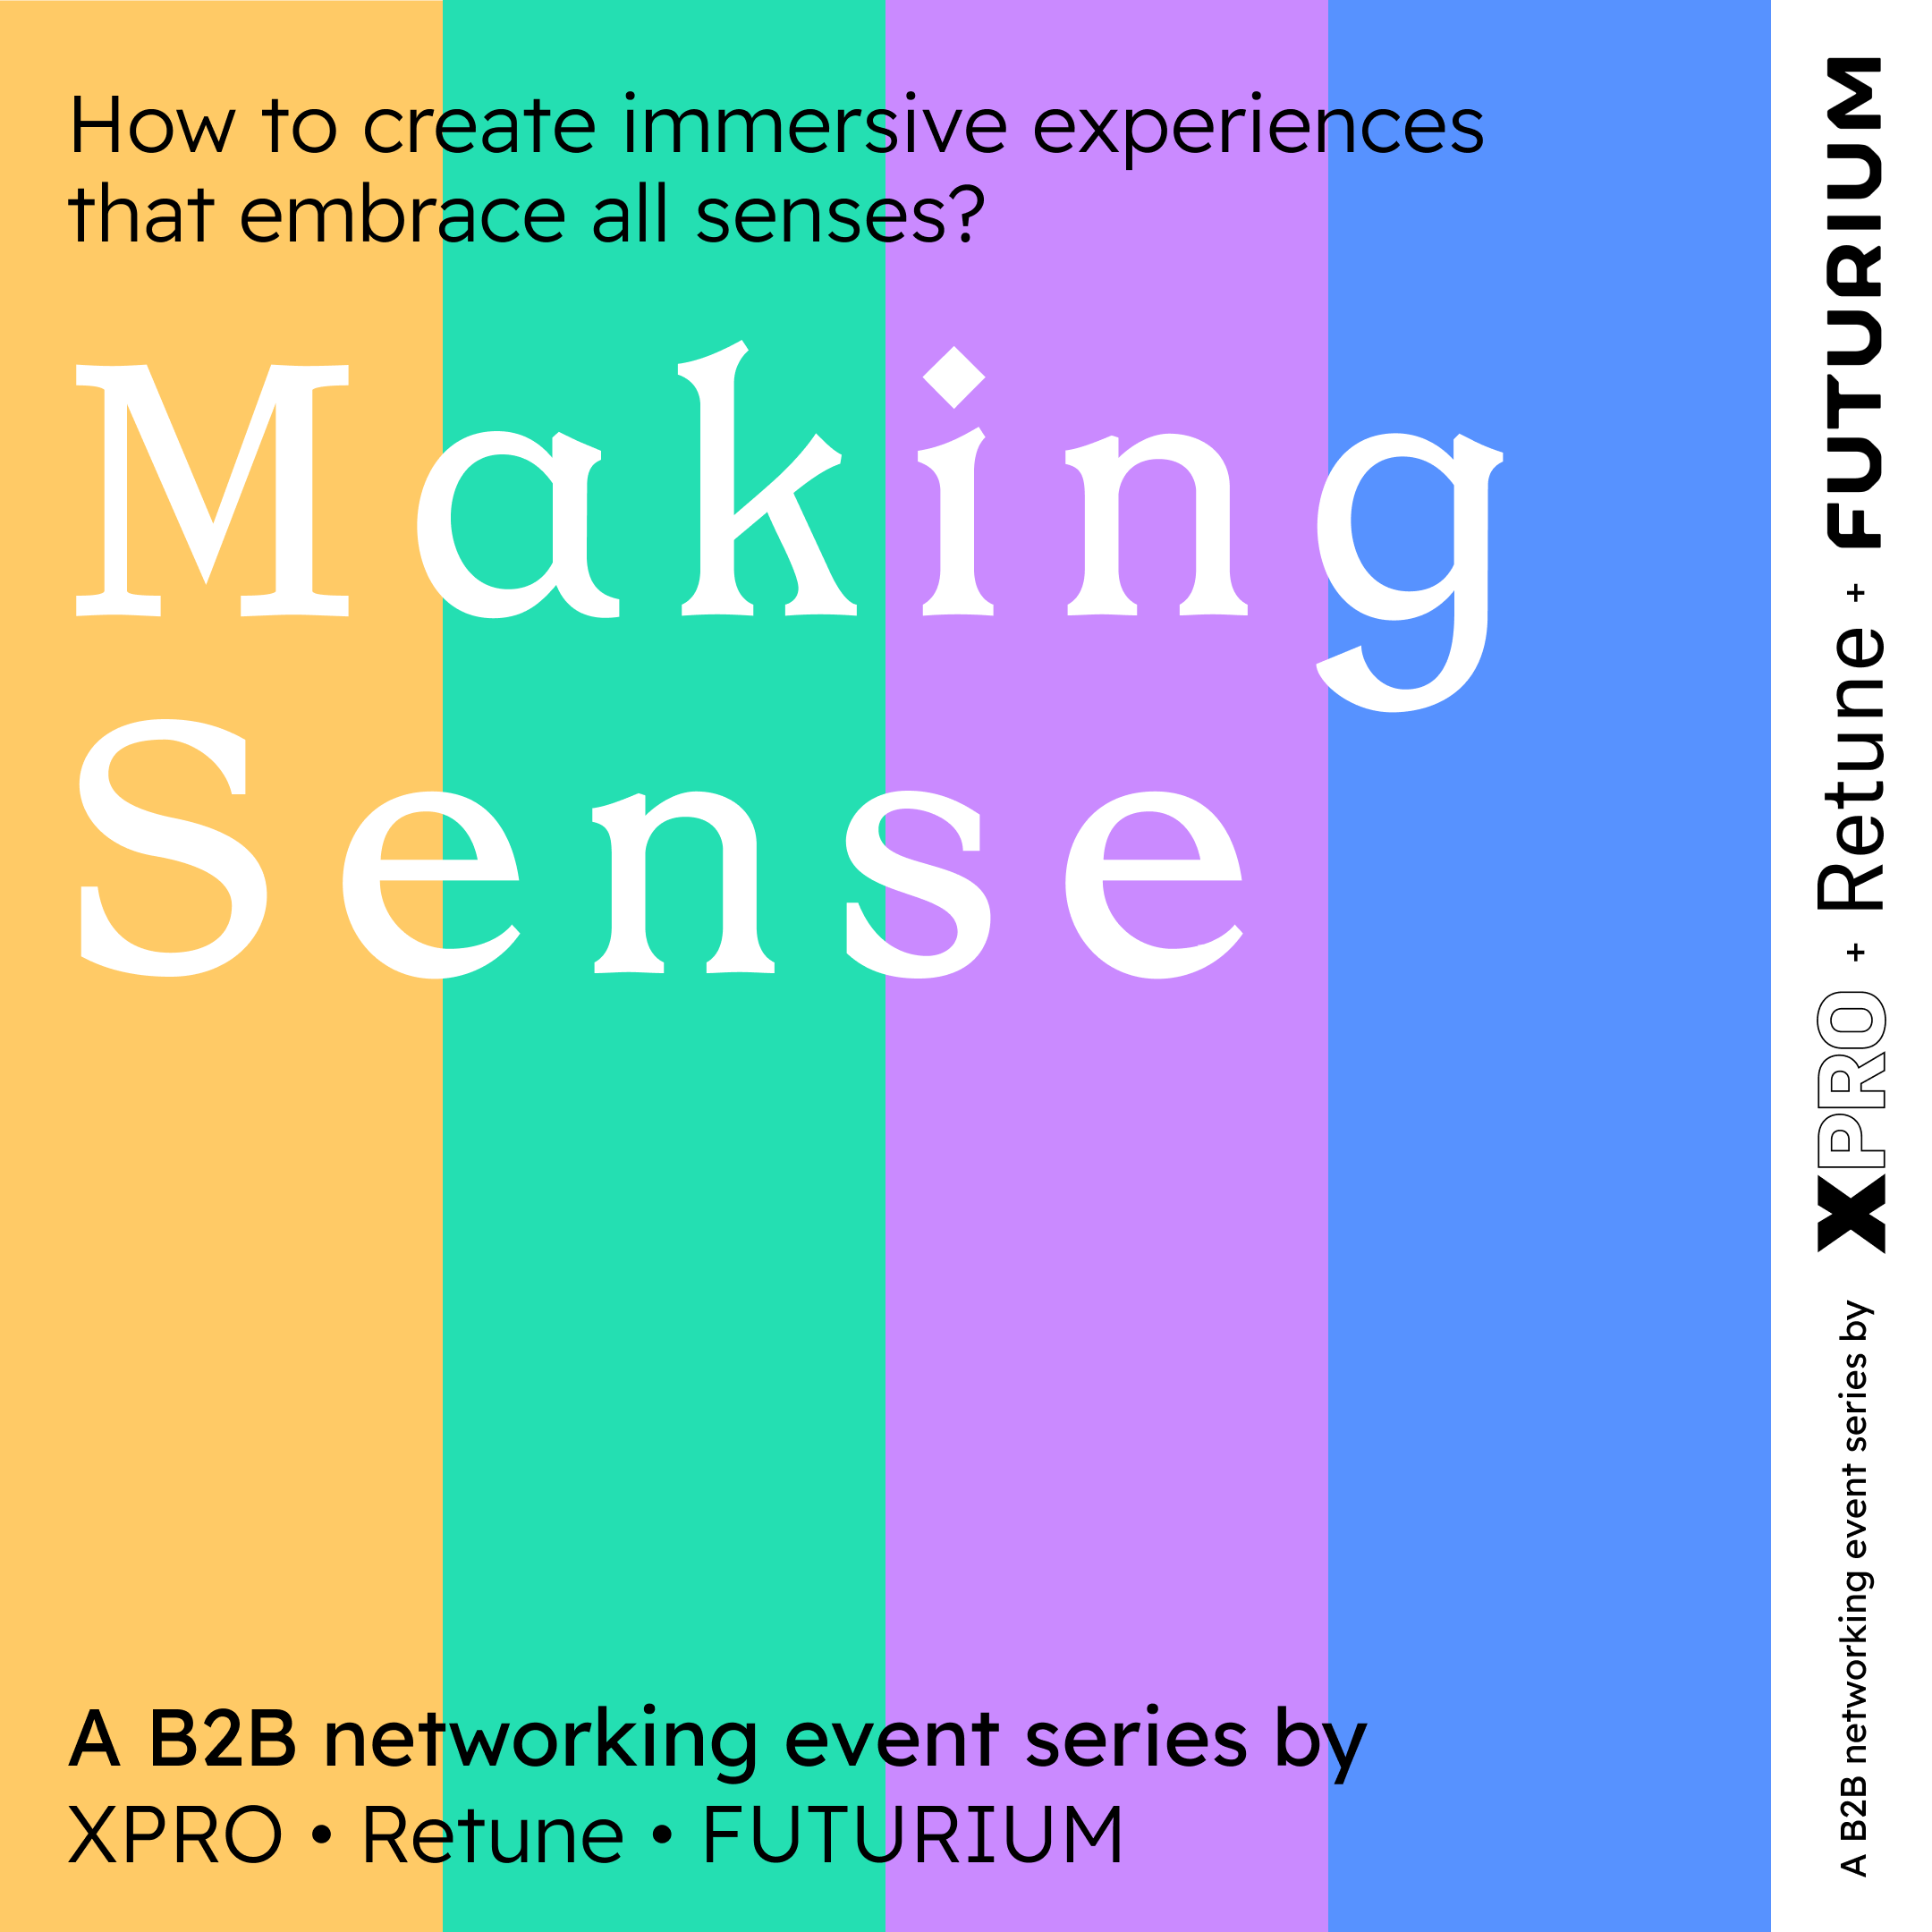 Making Sense, a series of events by XPRO Berlin and Retune and in cooperation with FUTURIUM. Graphic design: Carsten Giese, Studio Regular